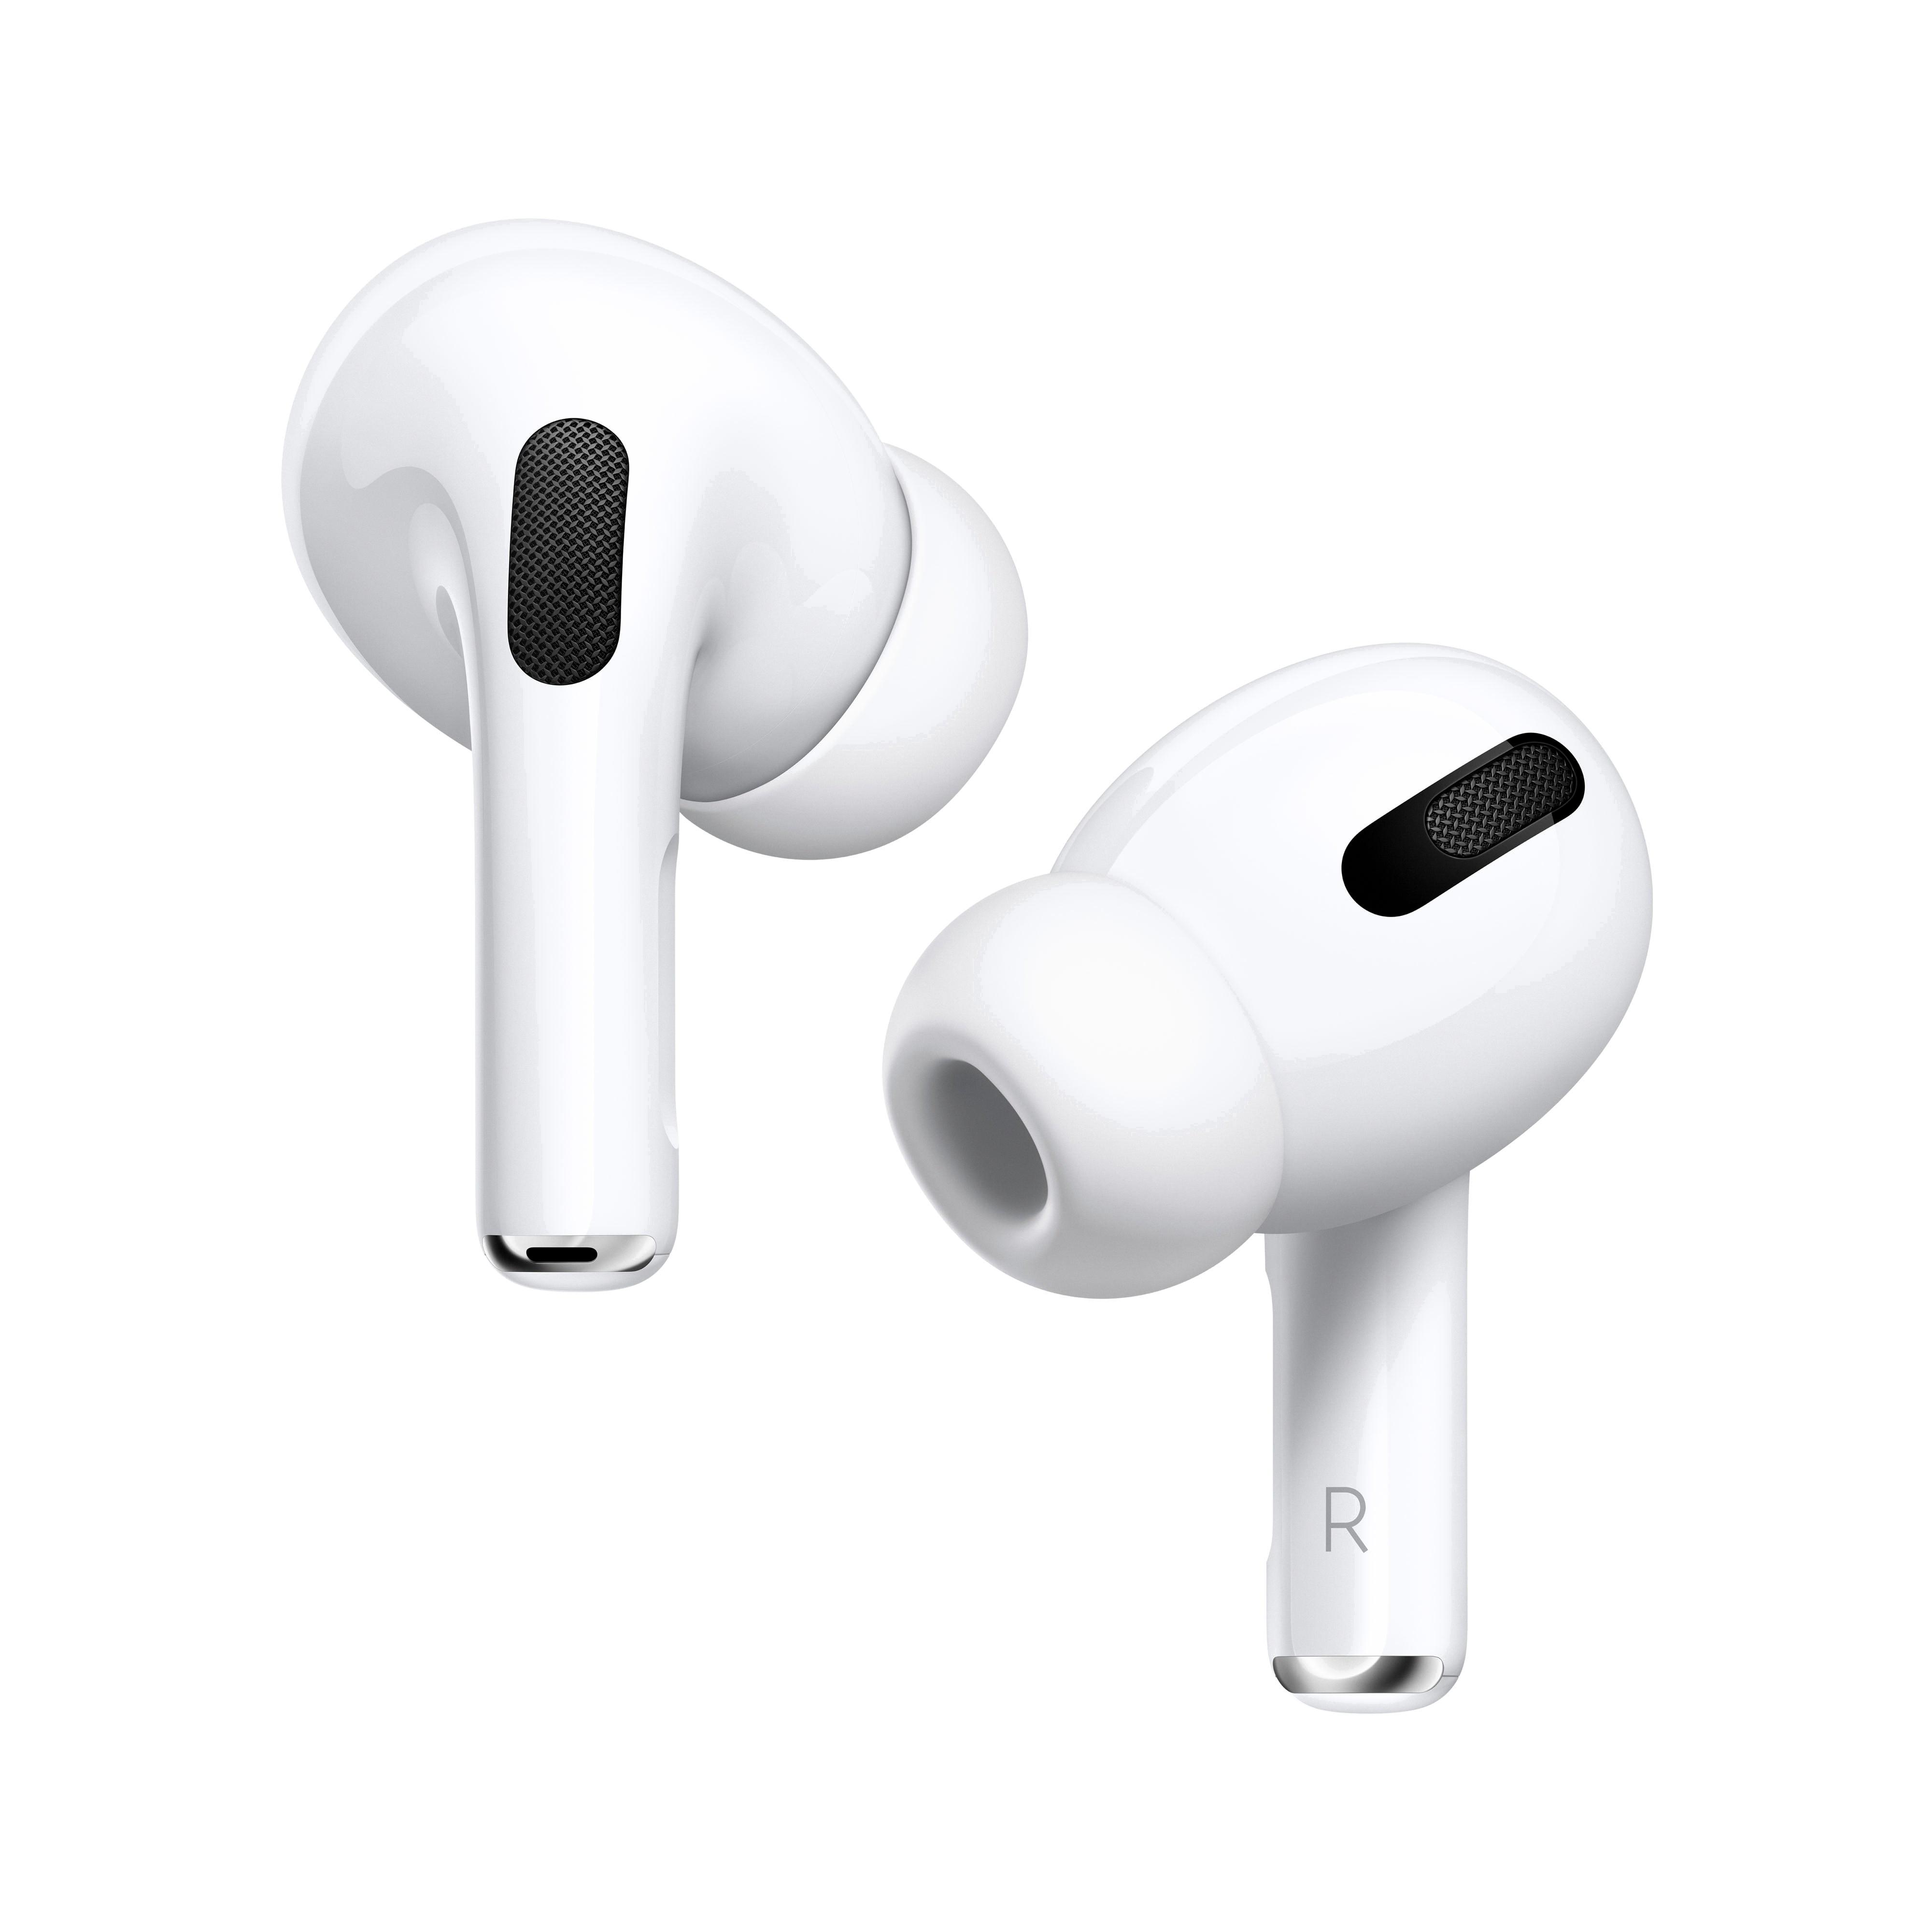 Troubleshooting the i12 AirPods Left Ear Not Charging 14